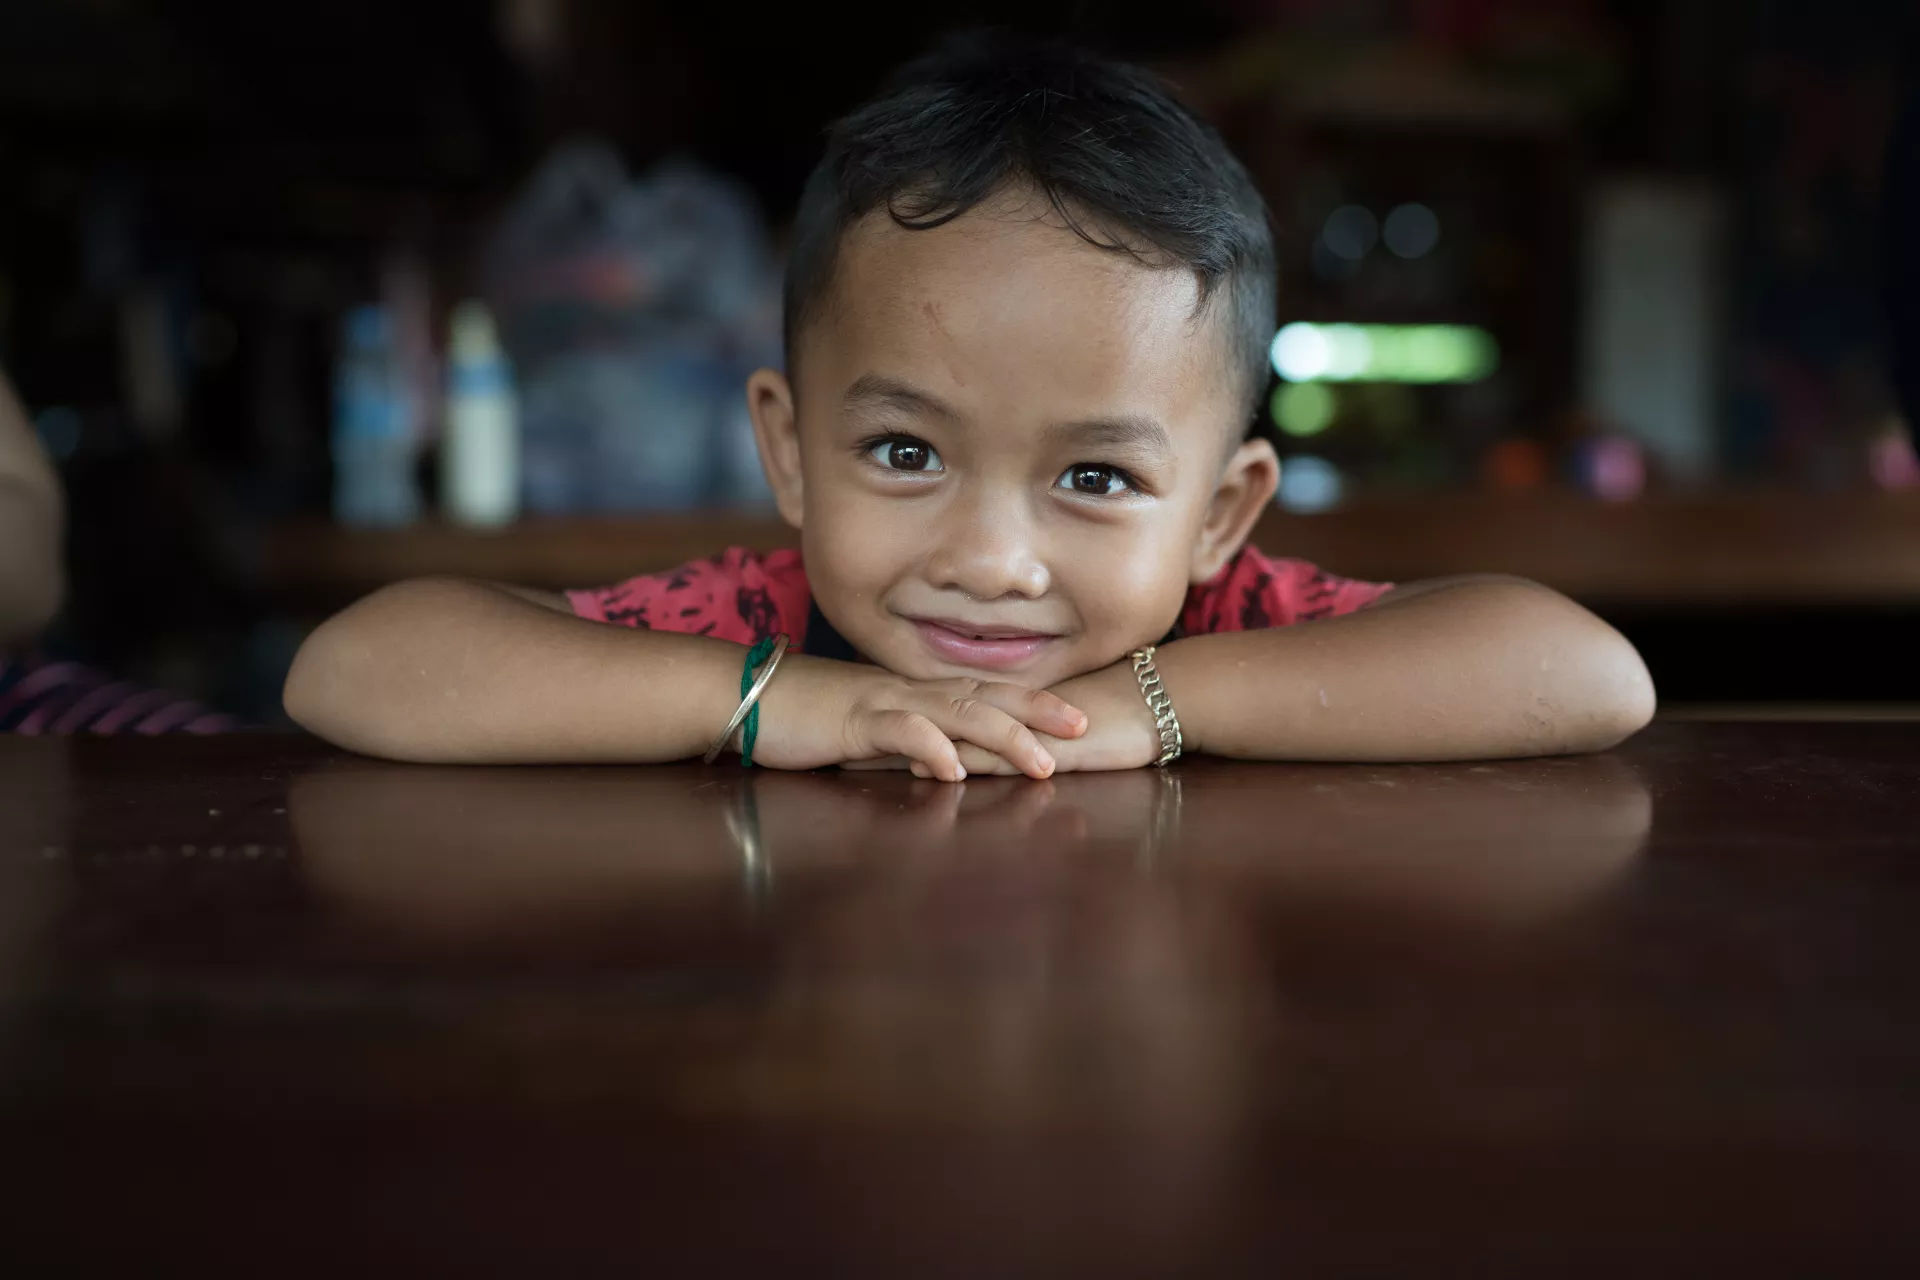 A four-year-old boy rests his head on his hands at a table in his house, smiling.